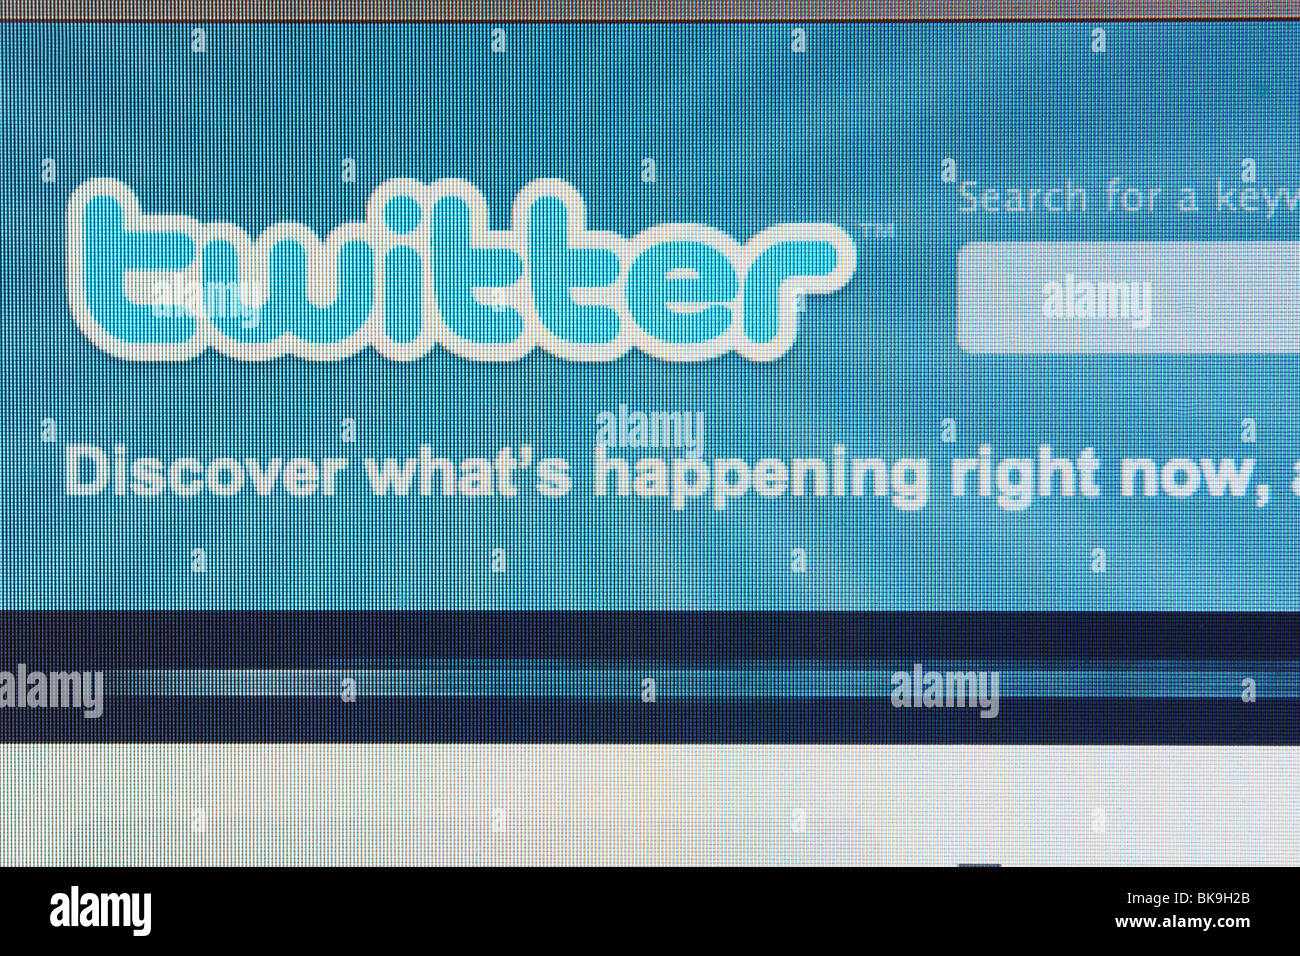 Twitter networking site on the internet. Stock Photo